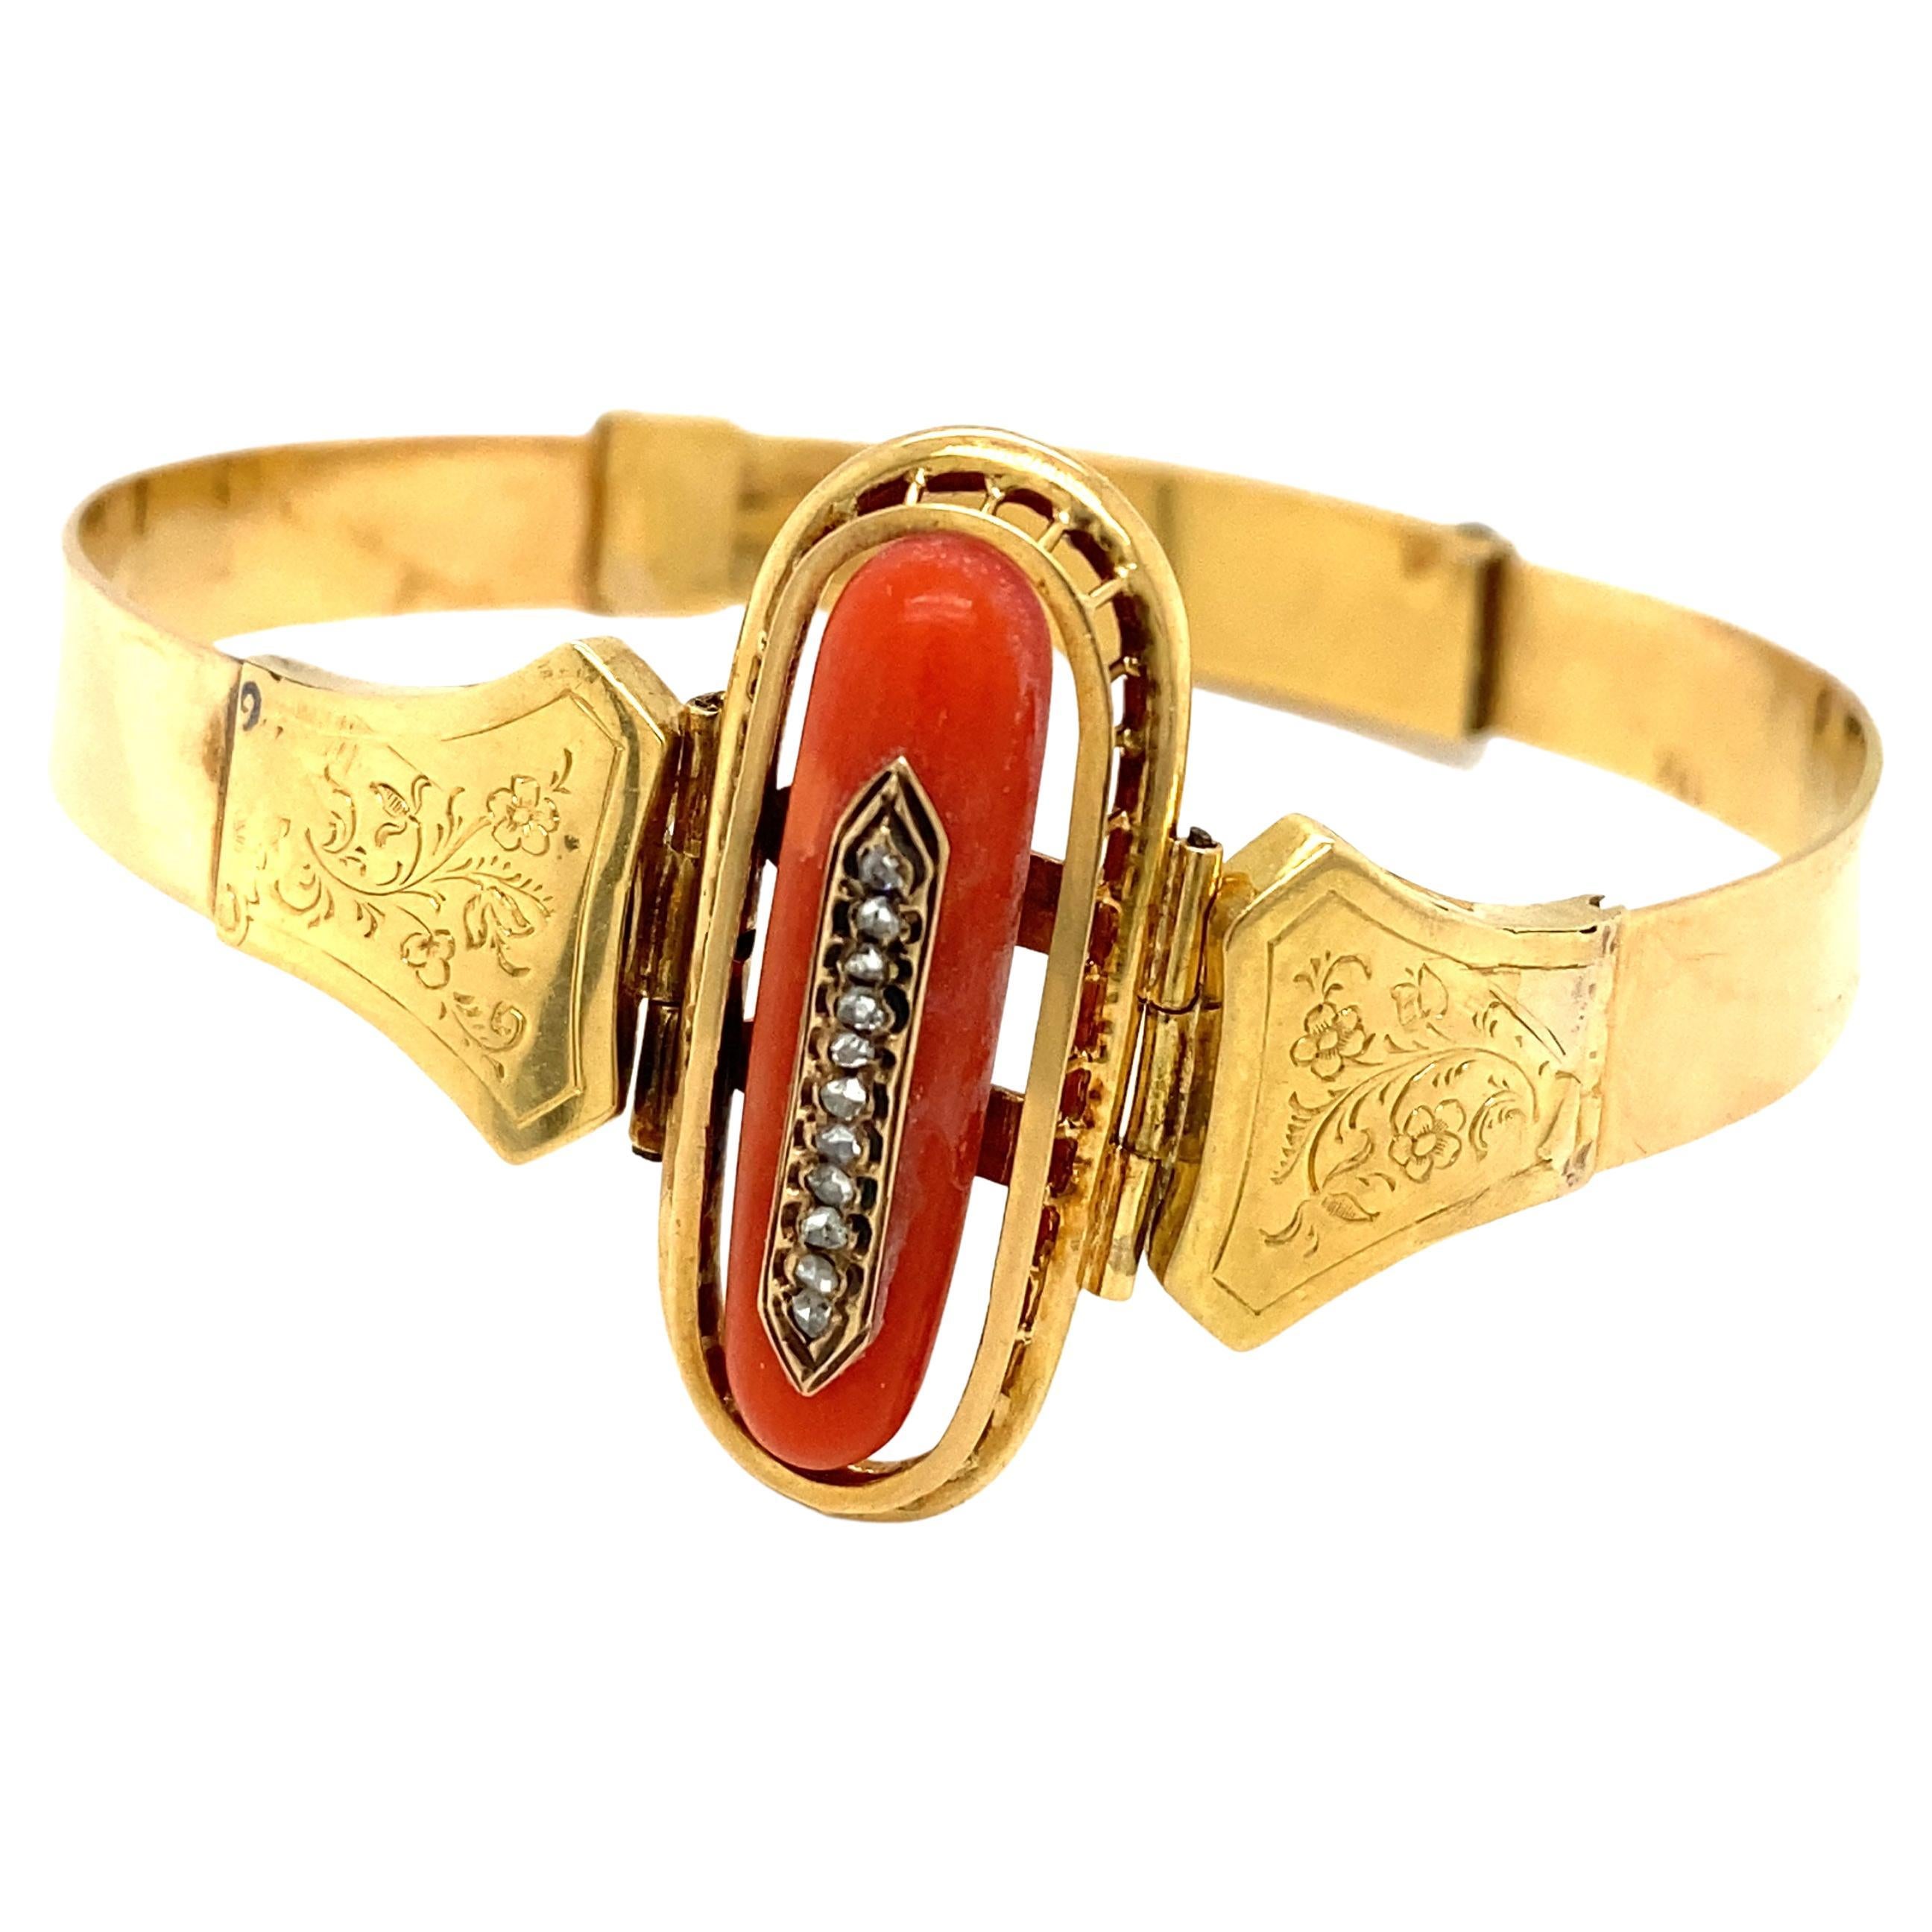 Circa 1890s Victorian Coral and Diamond Bracelet in 14 Karat Gold For Sale